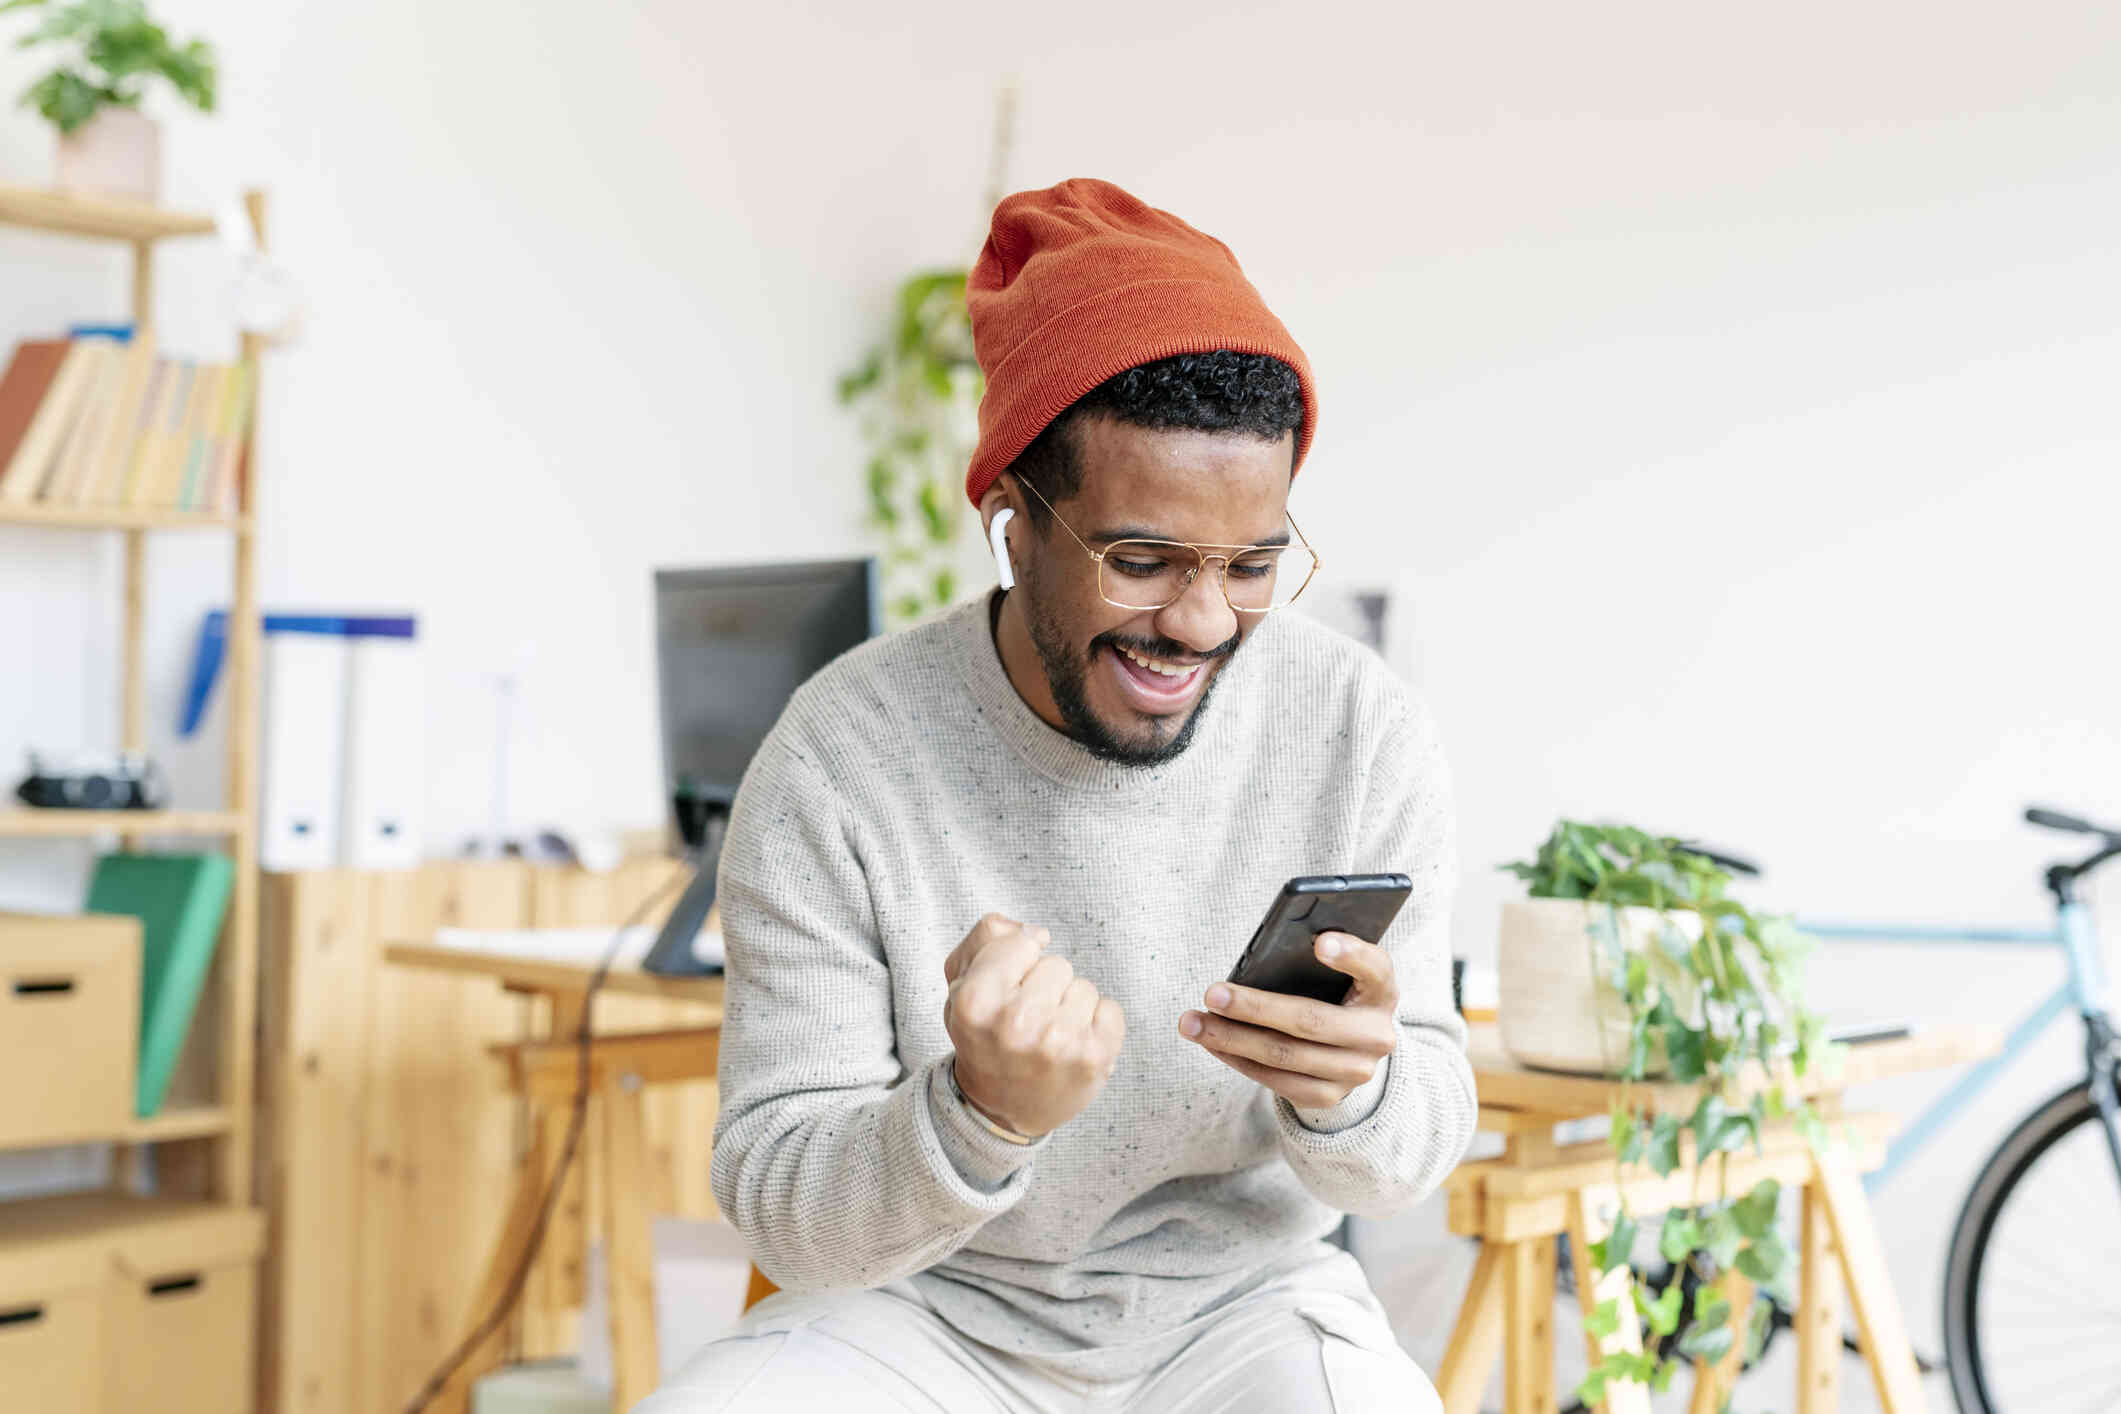 A man in an orange beanie sits in his home and smiles brightly while looking at the cellphone in his hand.